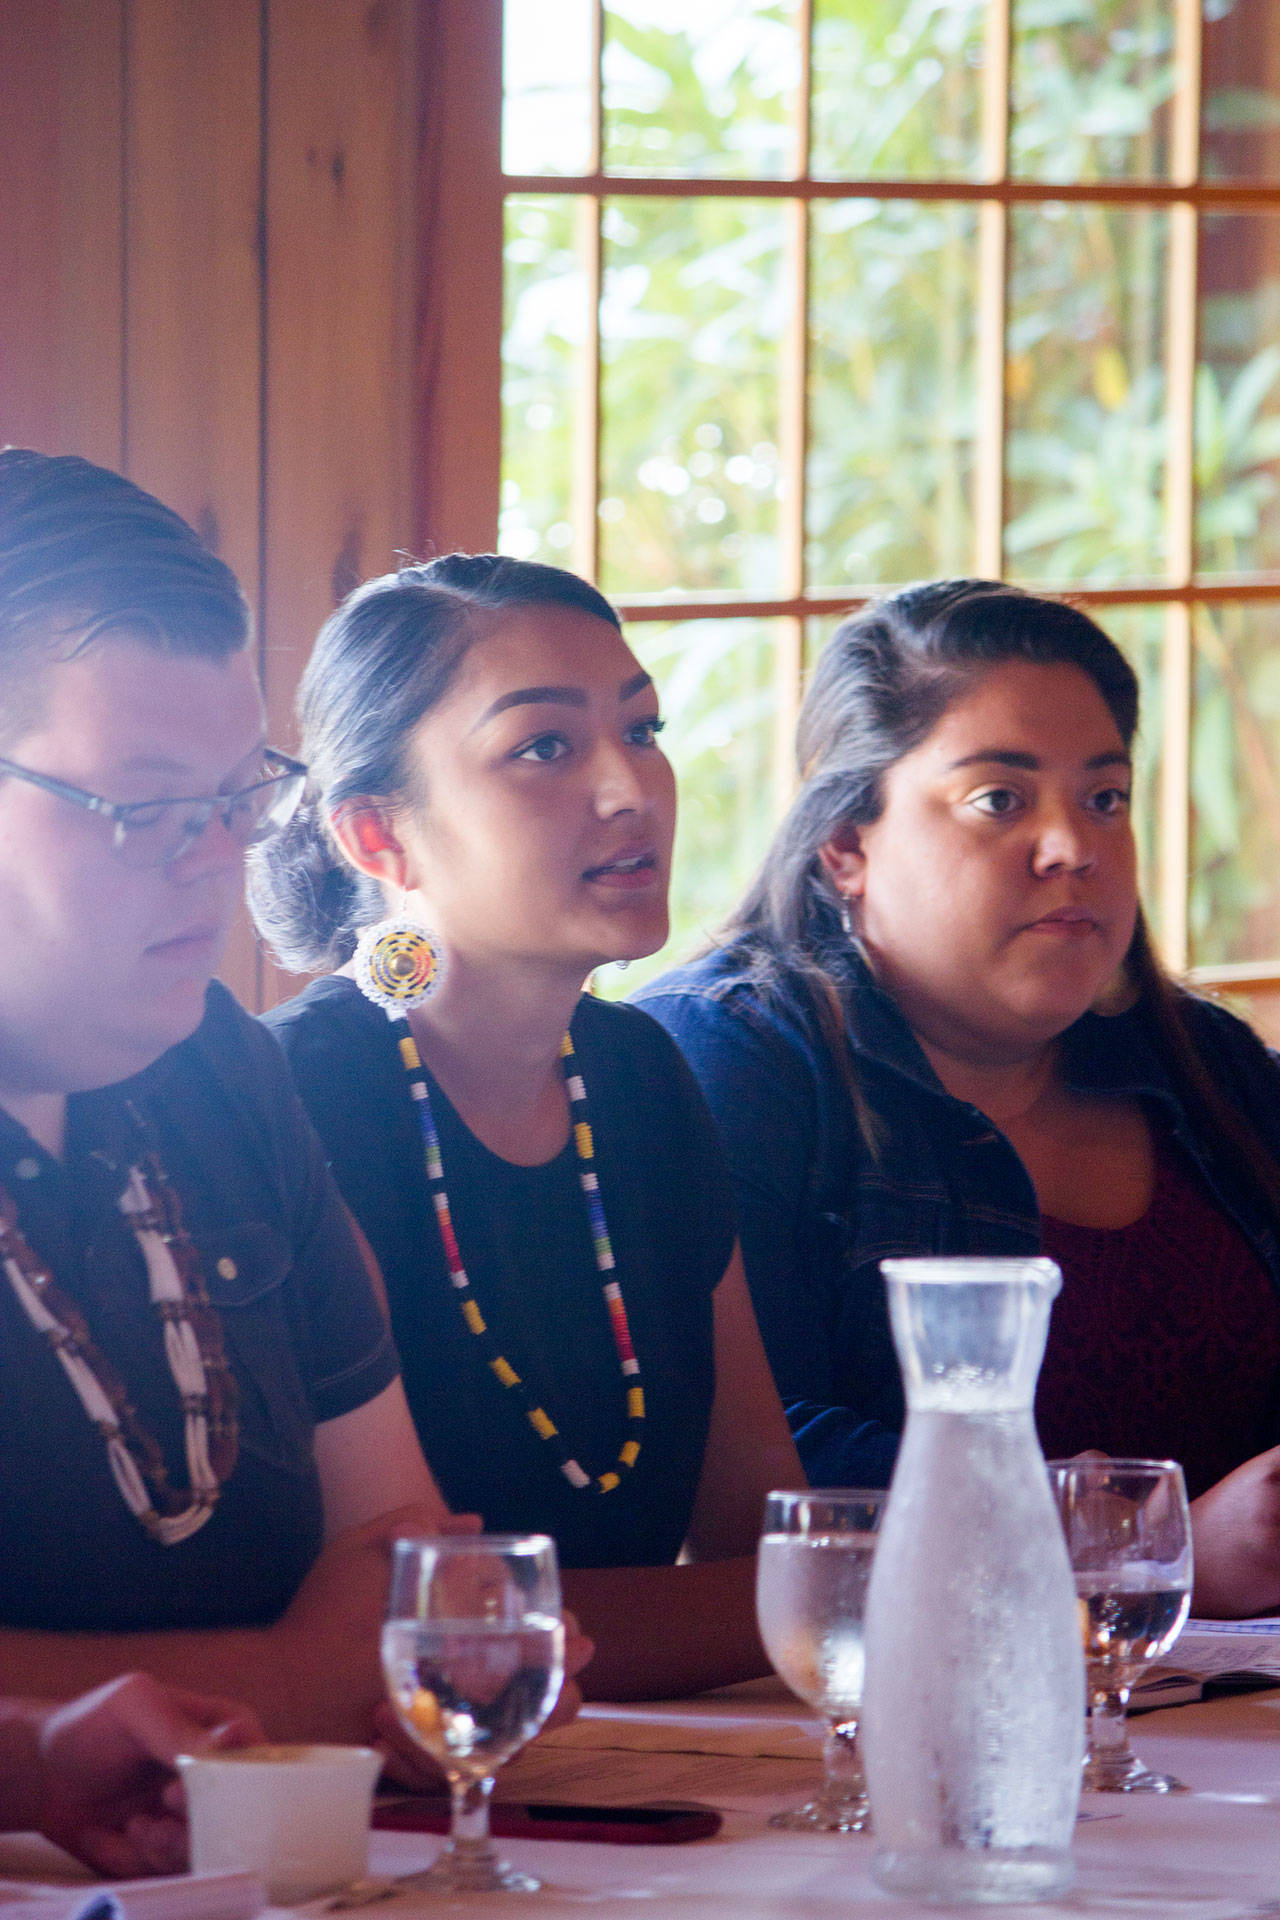 Several Millennials, ages teens to 20s, from the Port Gamble S’Klallam Tribe and Suquamish Tribe gathered in the conference room at Kiana Lodge Aug. 29 to meet with three members of Congress who wanted to hear their views about issues of concern to them. (Sophie Bonomi/Kitsap News Group)